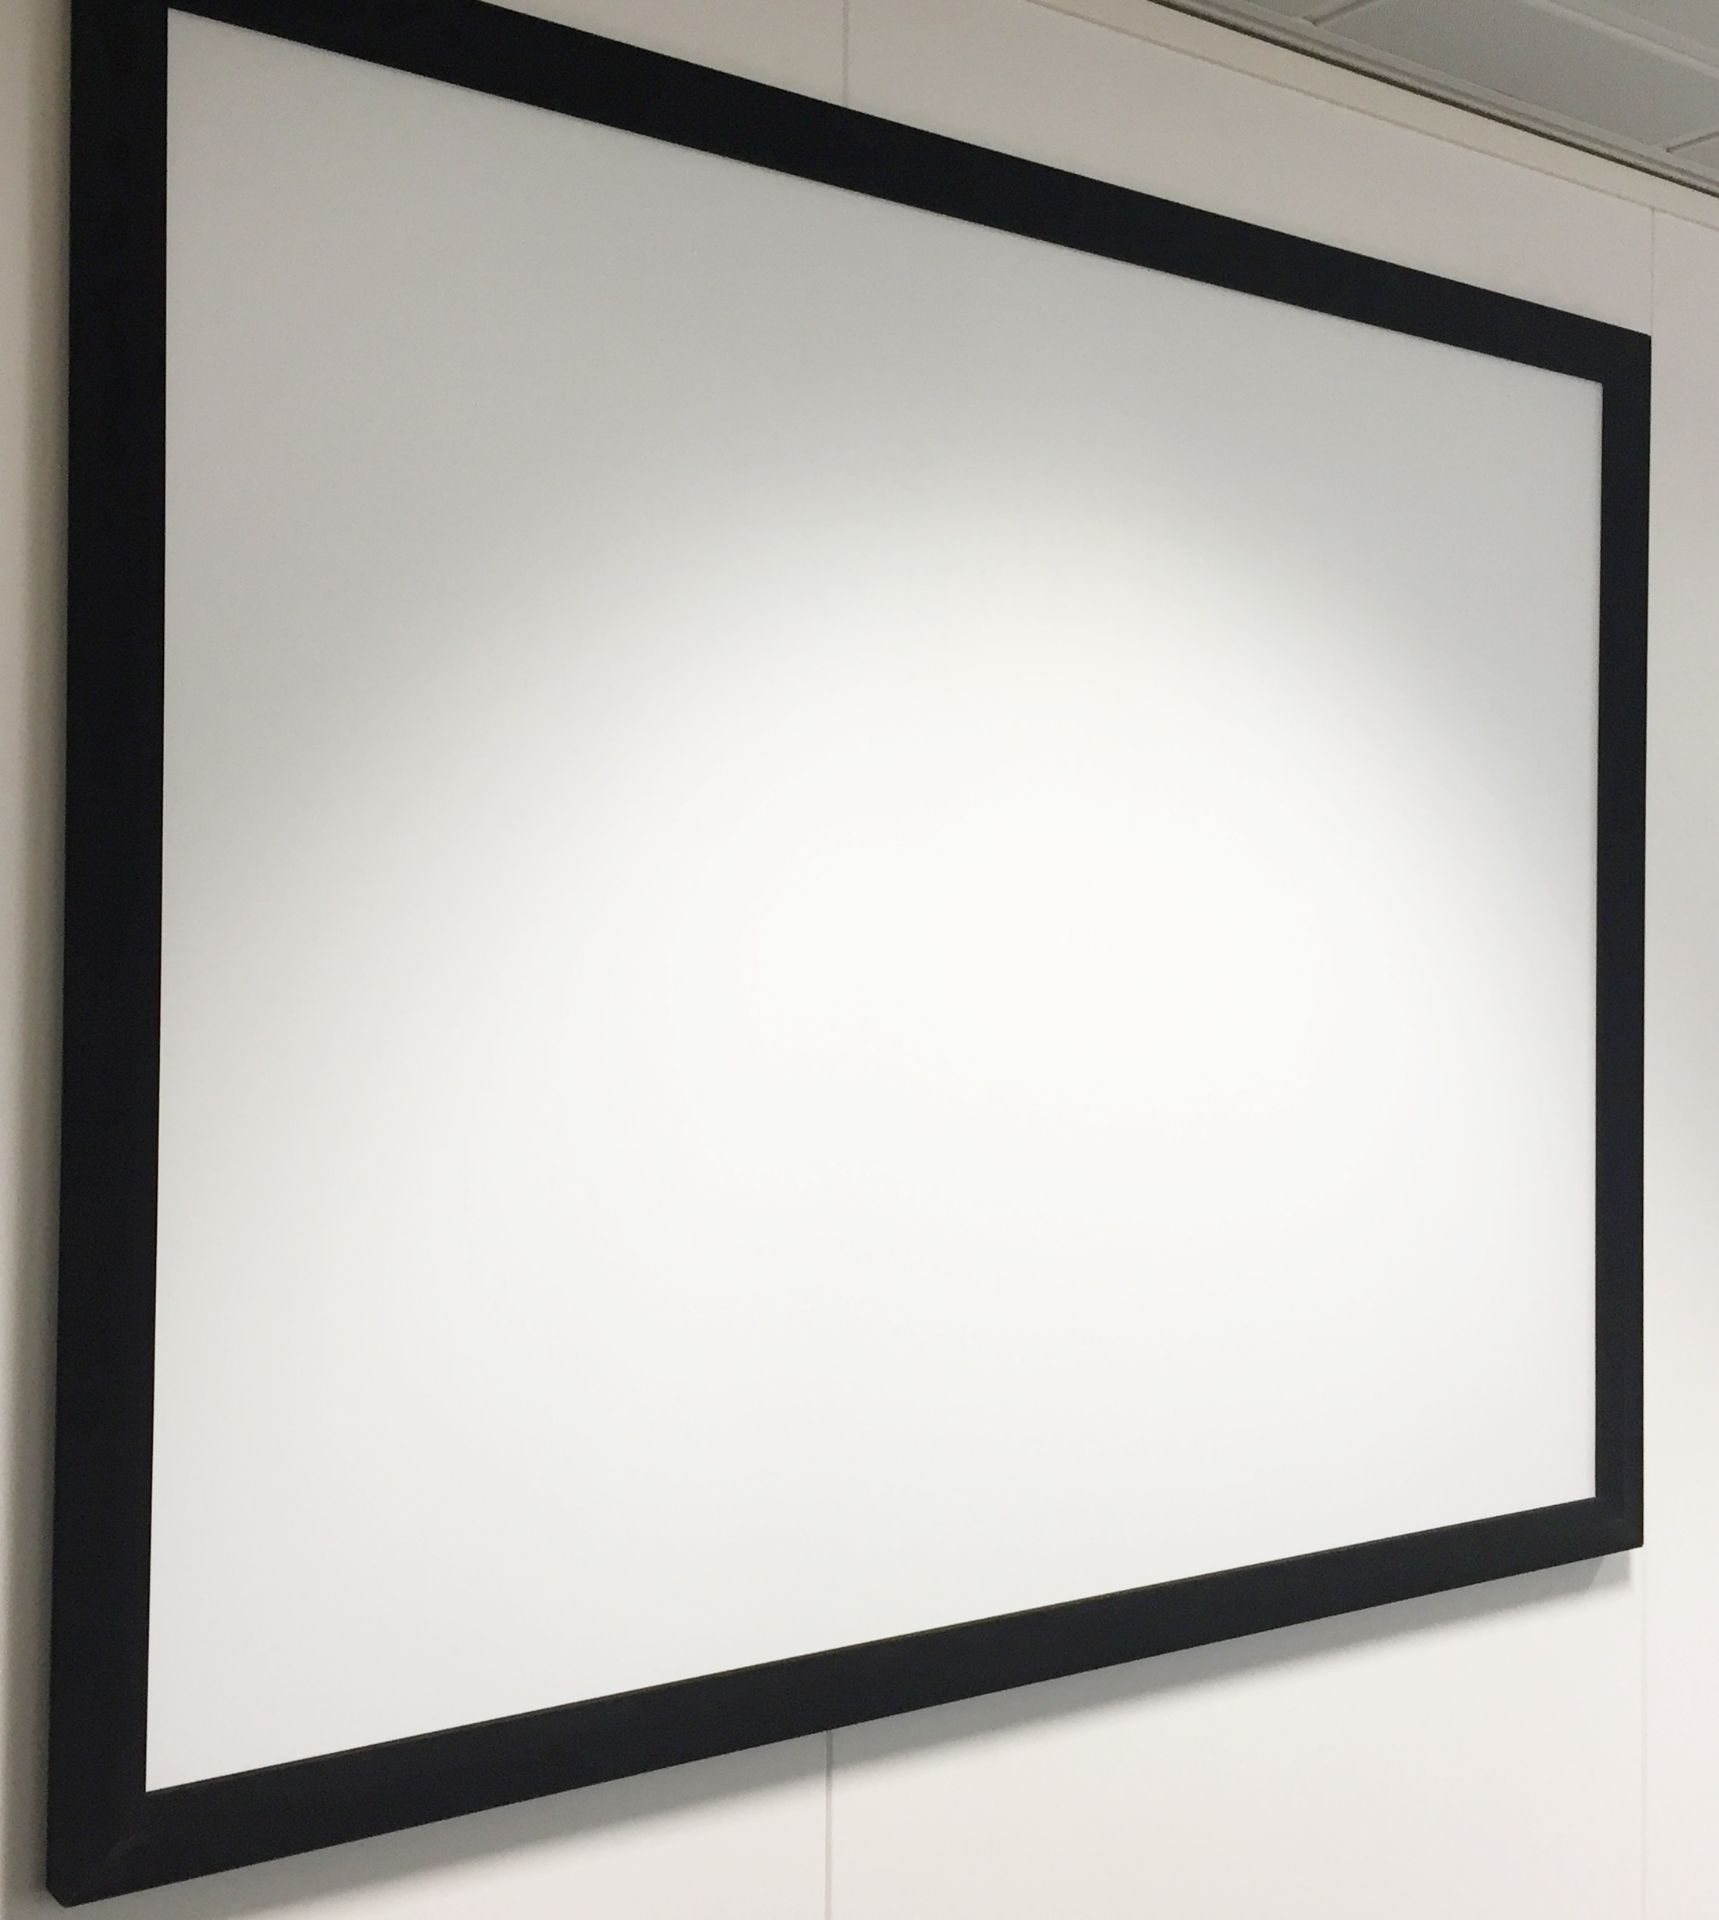 1 x Fixed Frame CINEMATIC Projection Screen - Large Size With Deep Black Velvet Fixed Surround Surro